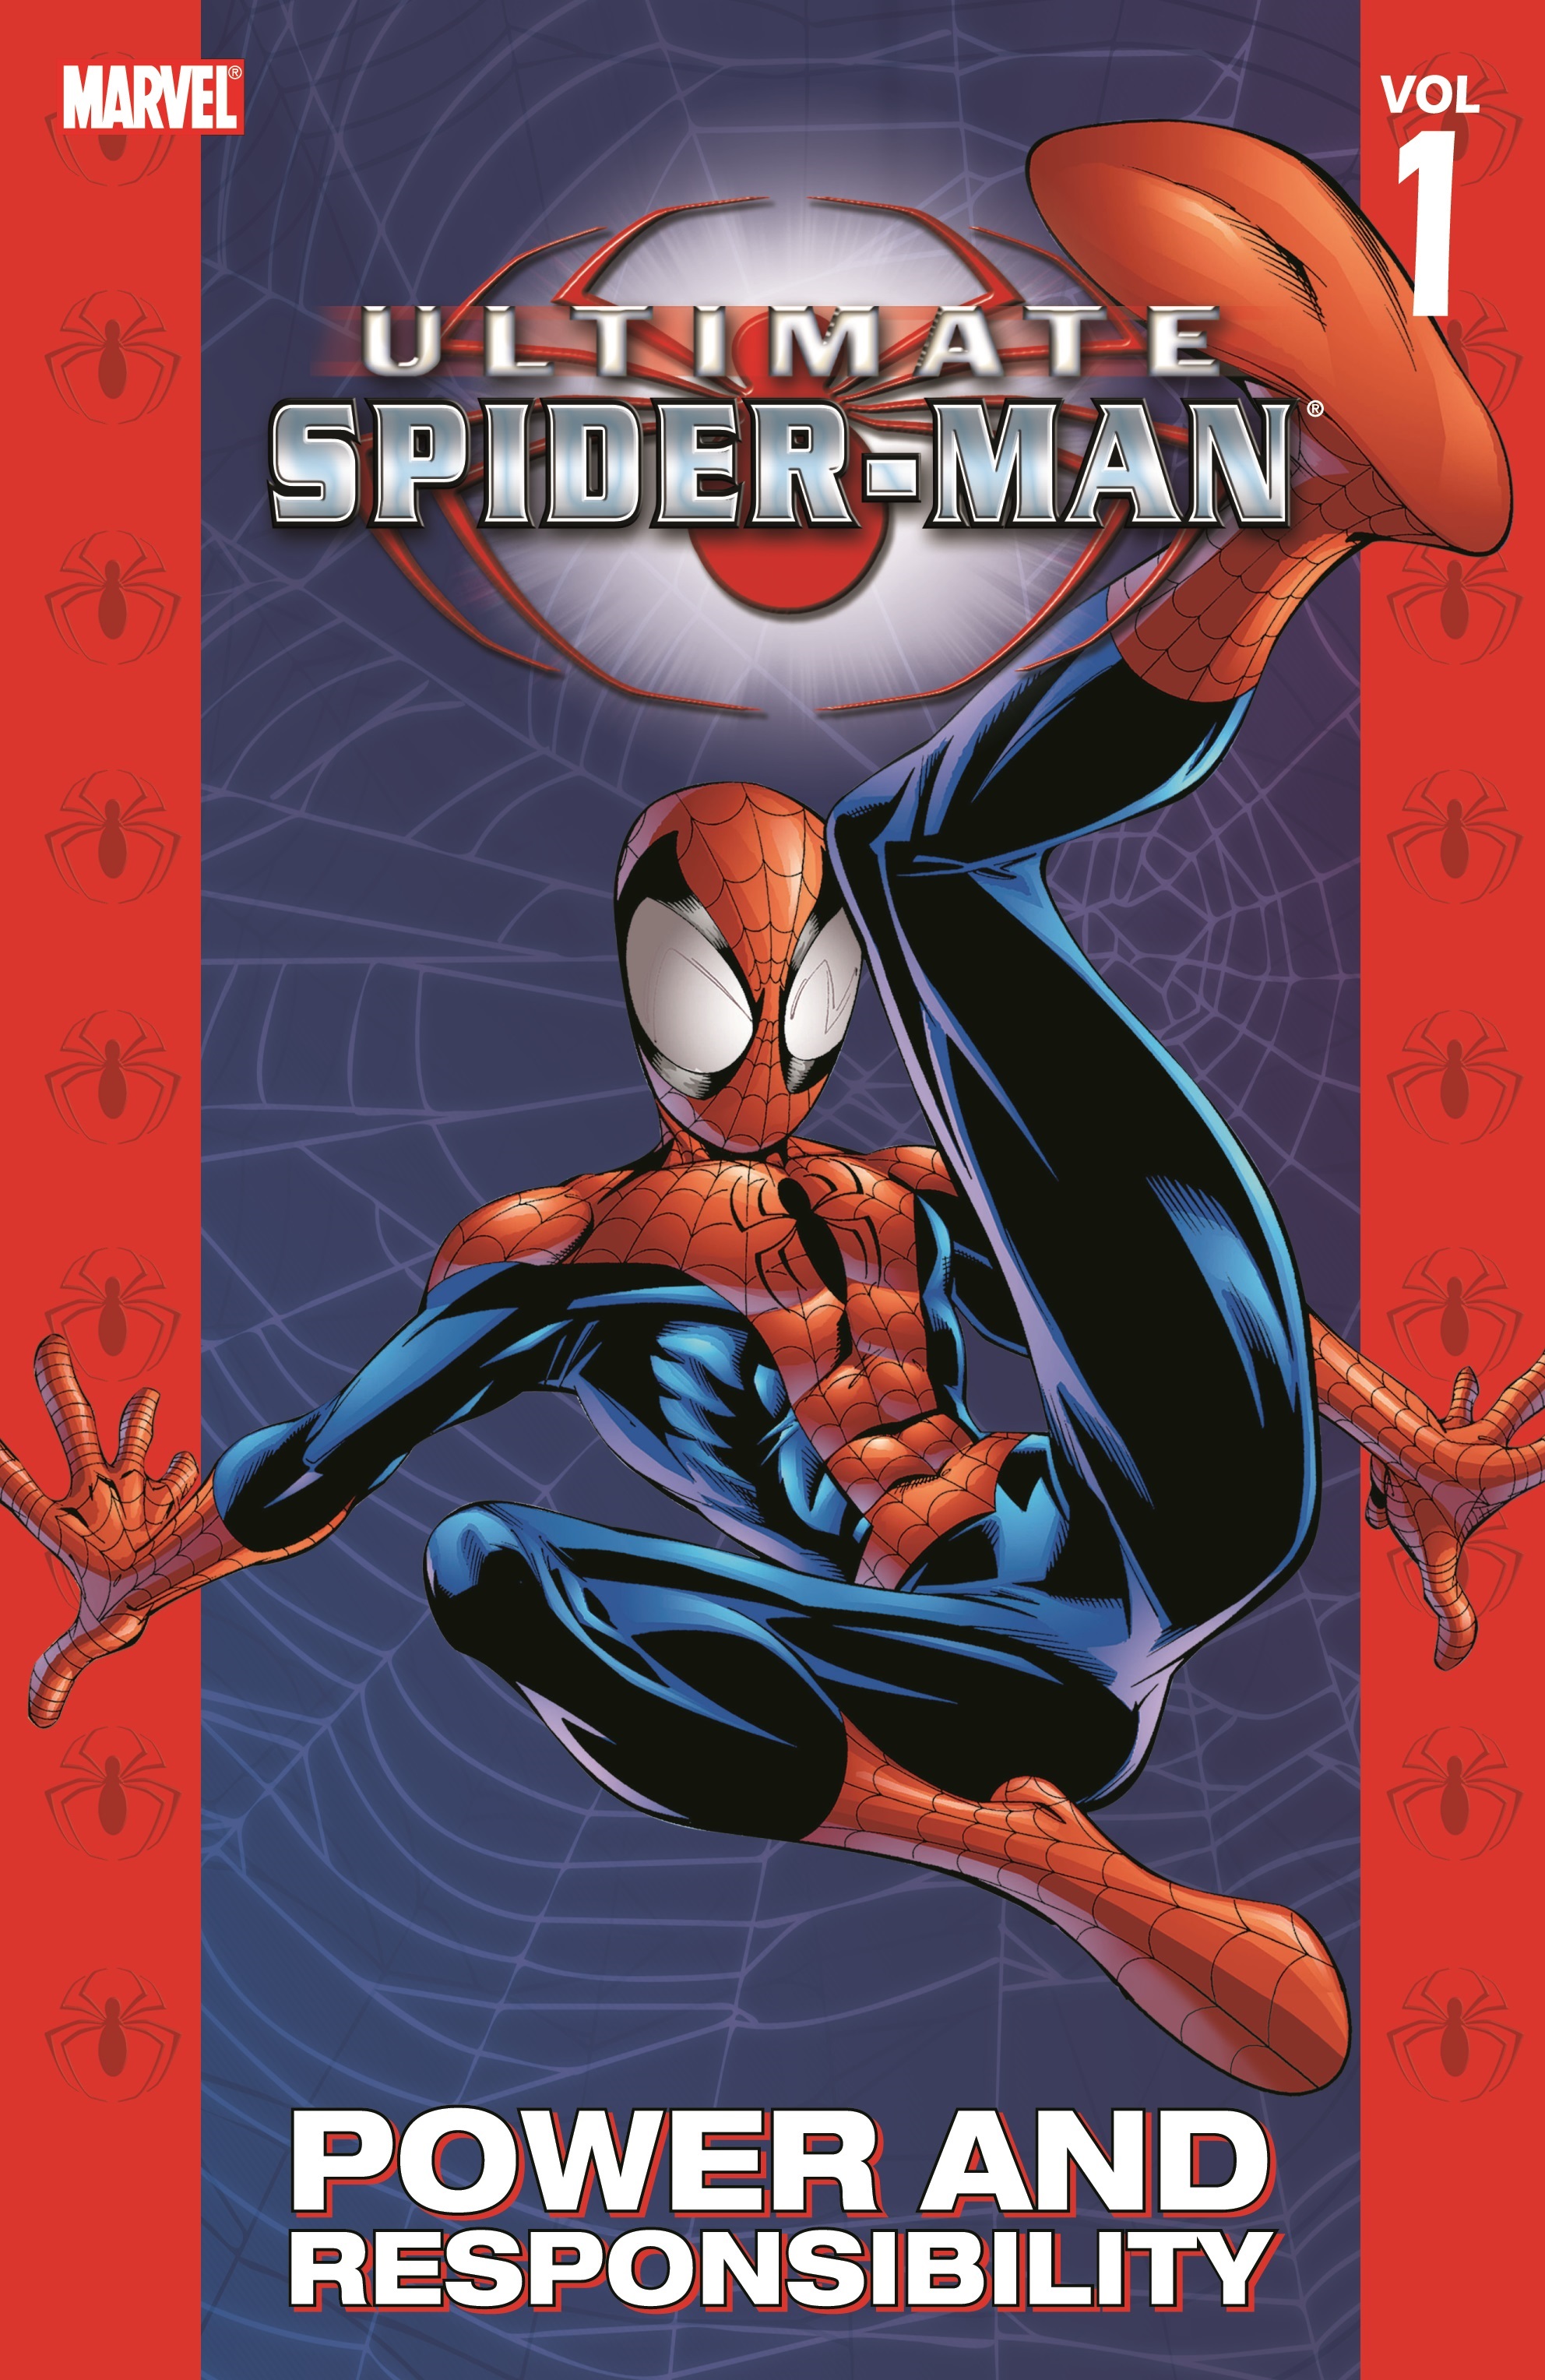 ULTIMATE SPIDER-MAN VOL. 1: POWER & RESPONSIBILITY TPB (Trade Paperback)